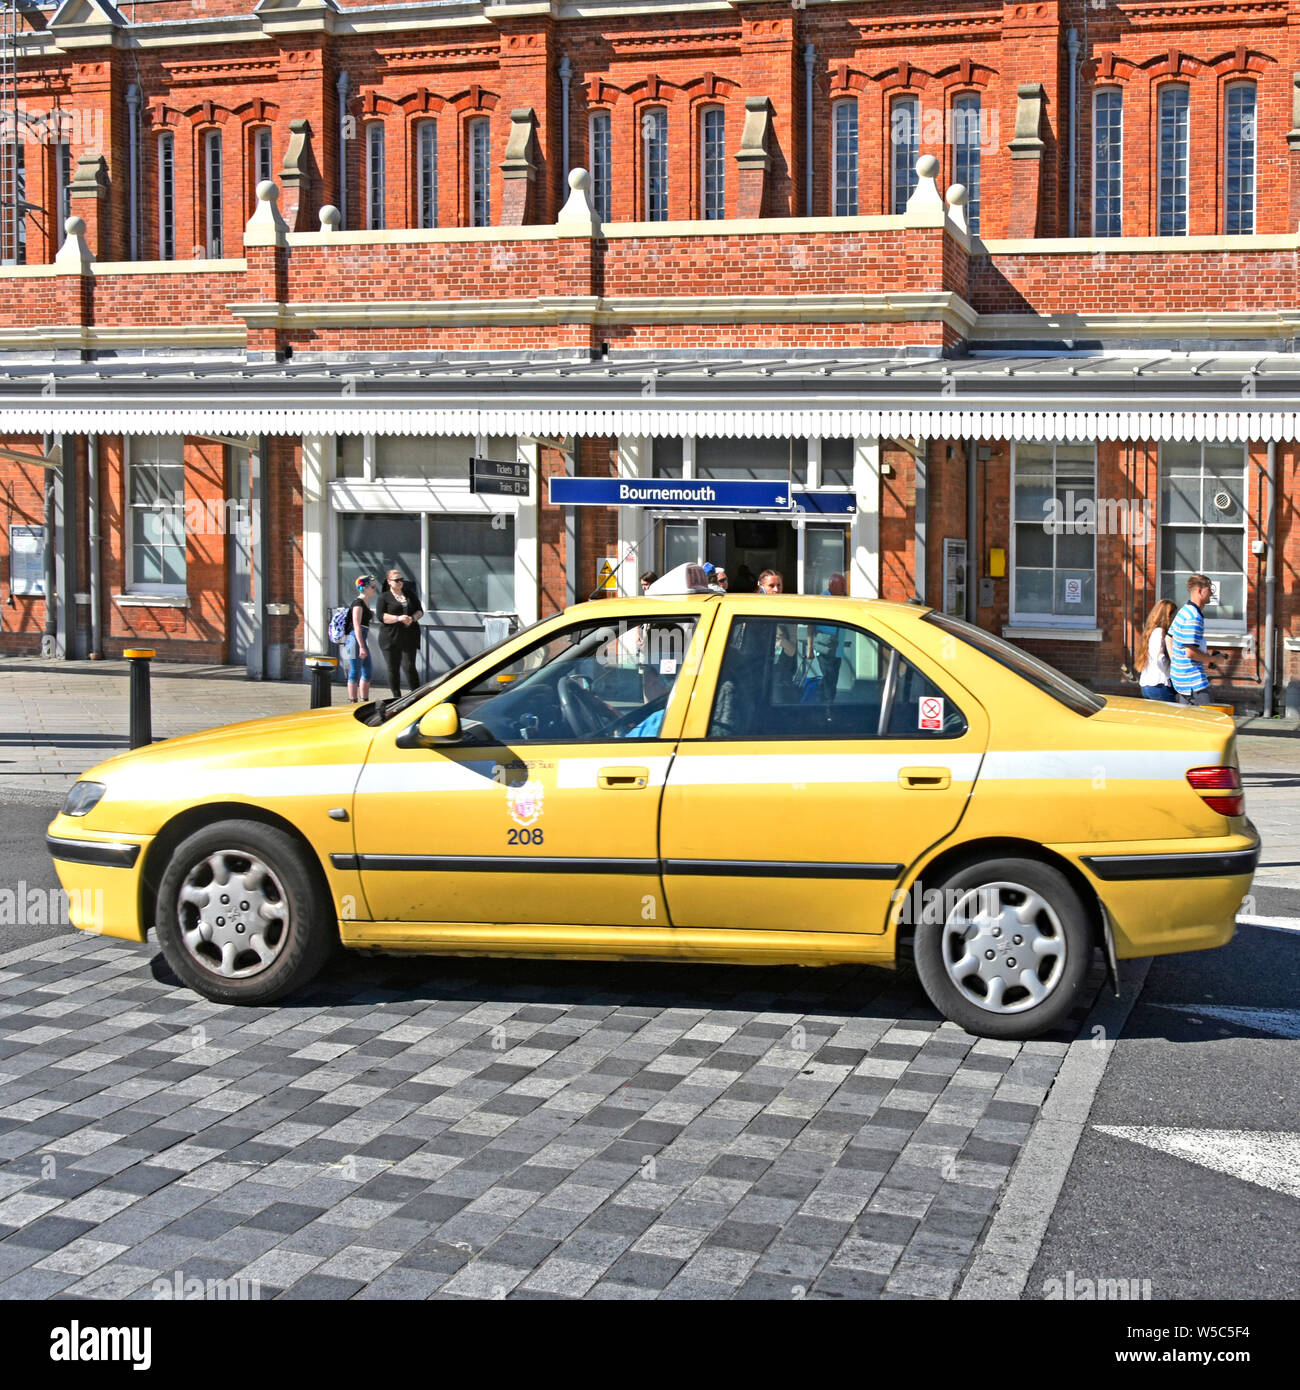 Yellow taxi cab car driver & passenger driving across cobbled speed hump Bournemouth railway train station Victorian brick building Dorset England UK Stock Photo